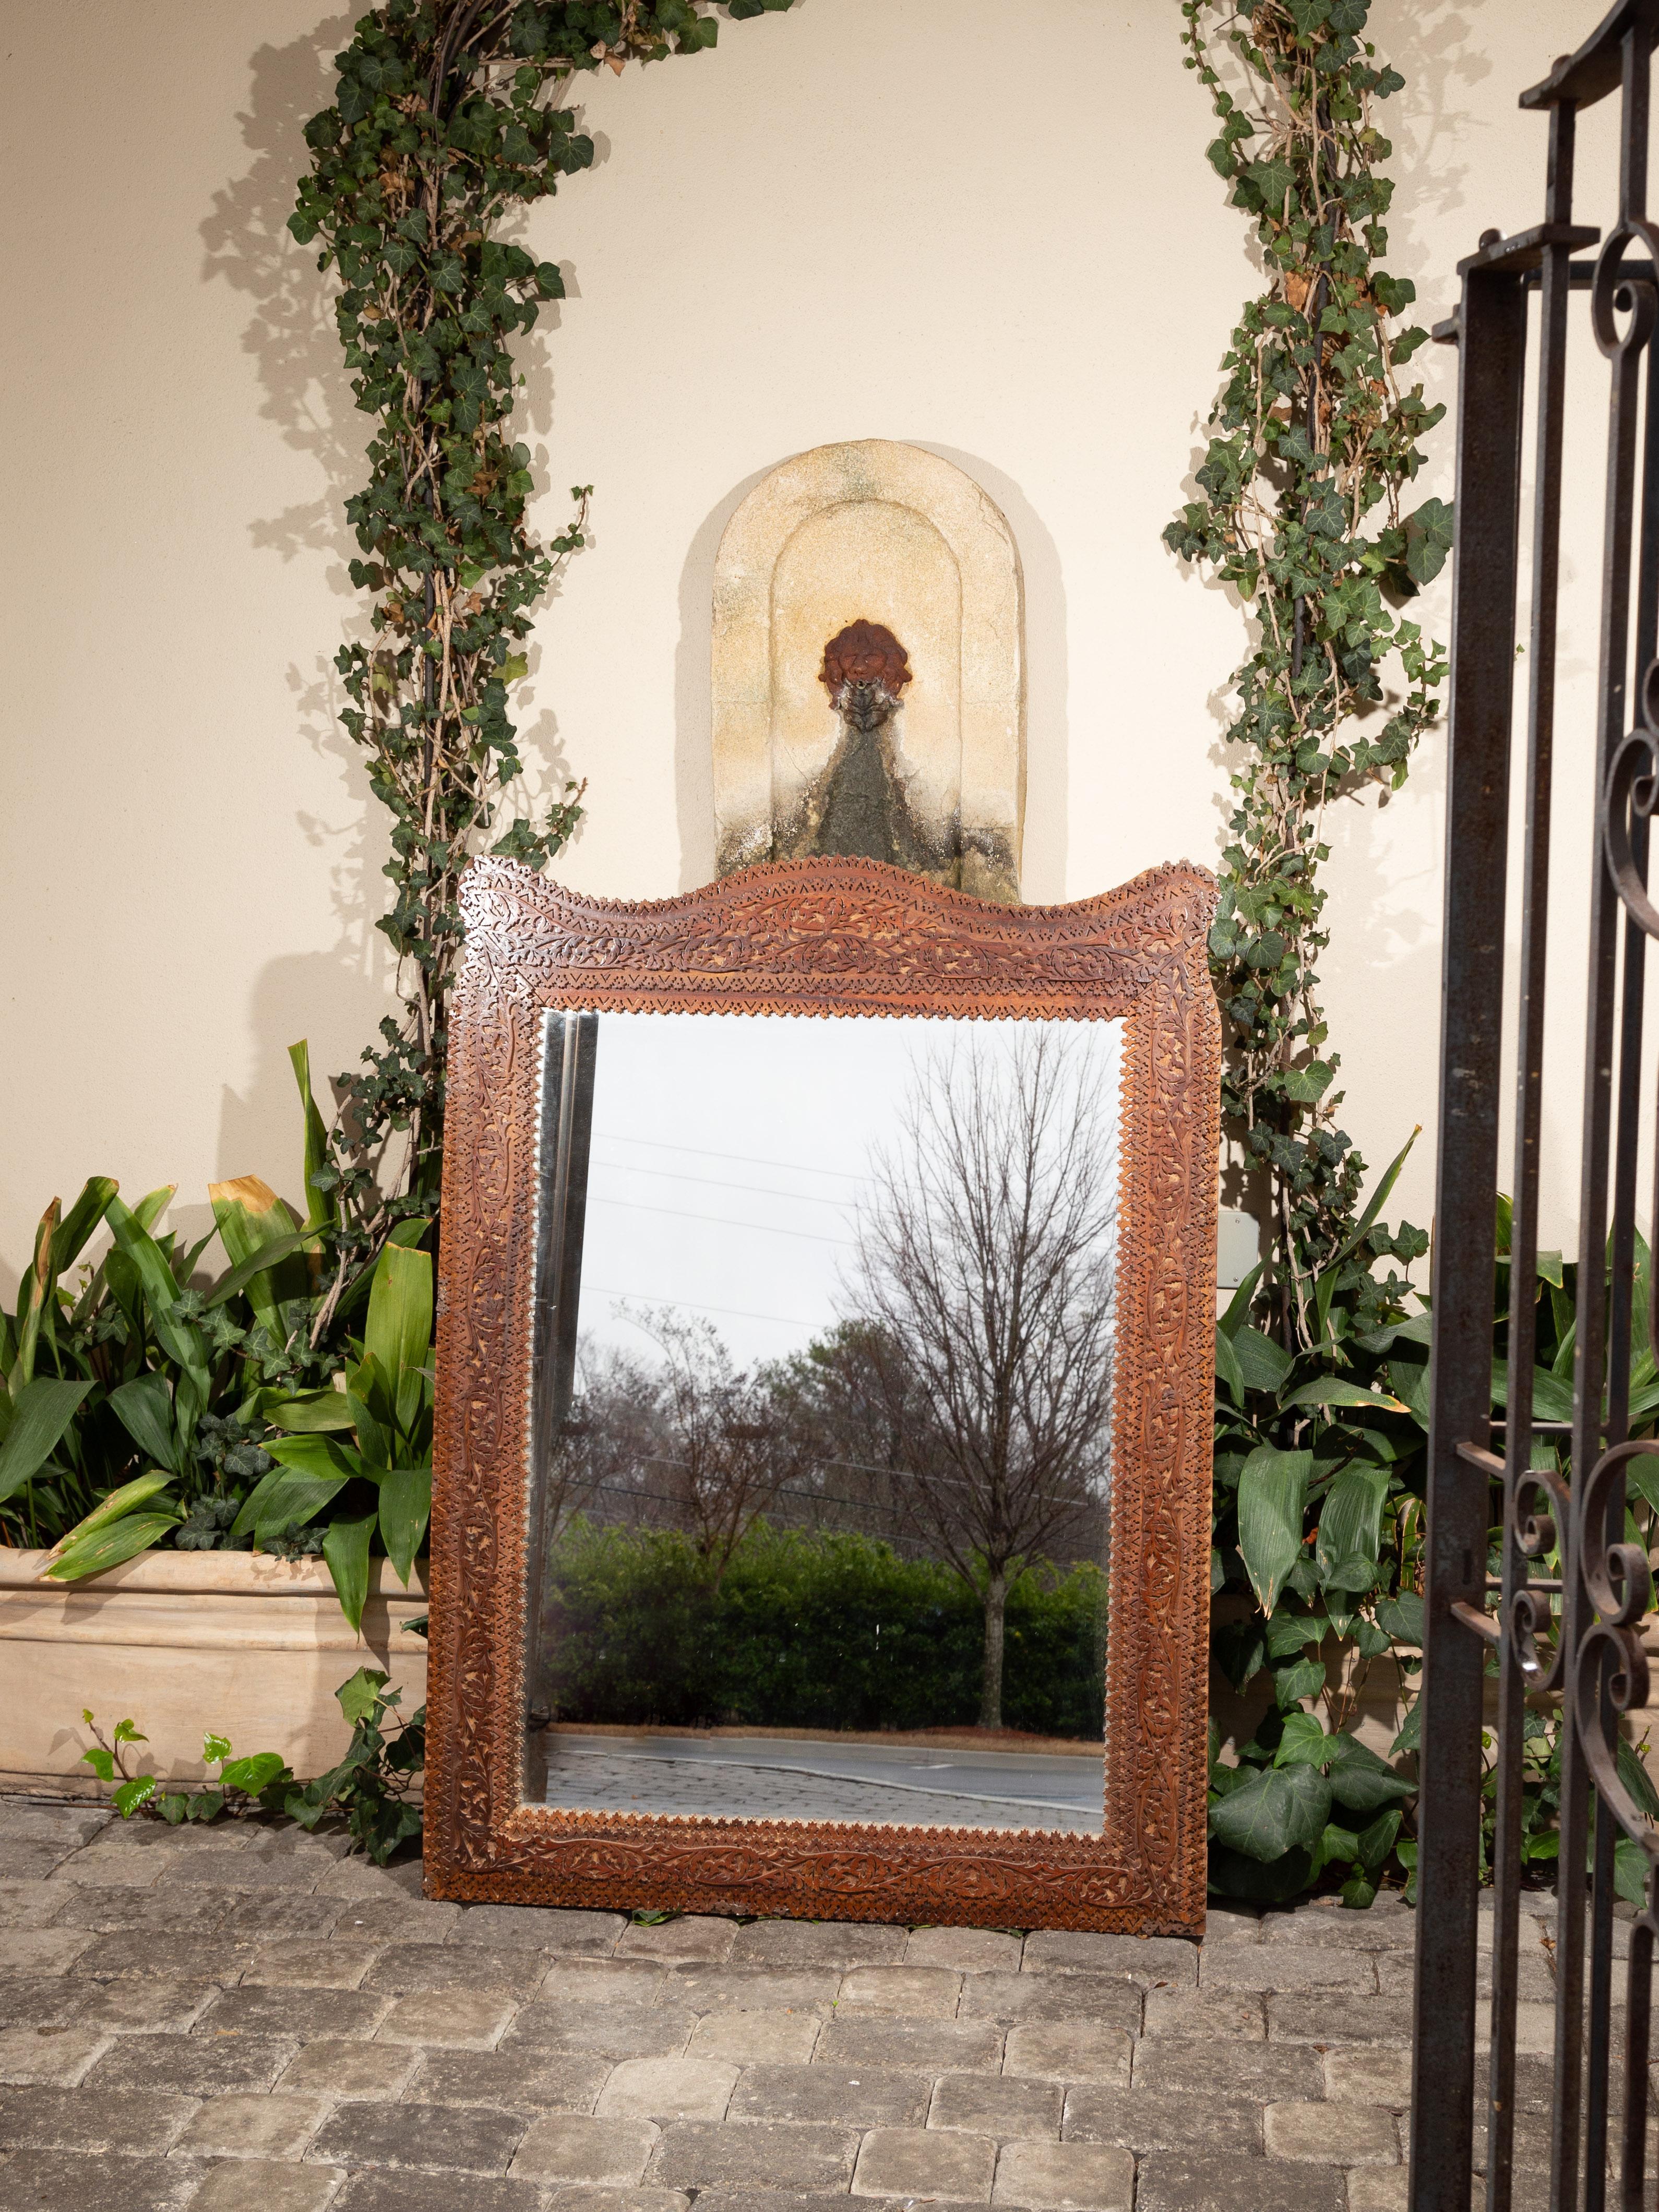 This Anglo-Indian mirror from the turn of the century features an exquisitely carved frame made of carefully cut-out motifs. The curvy crest contrasts nicely with the otherwise linear shape of the frame. The clear mirror provides perfect reflection.